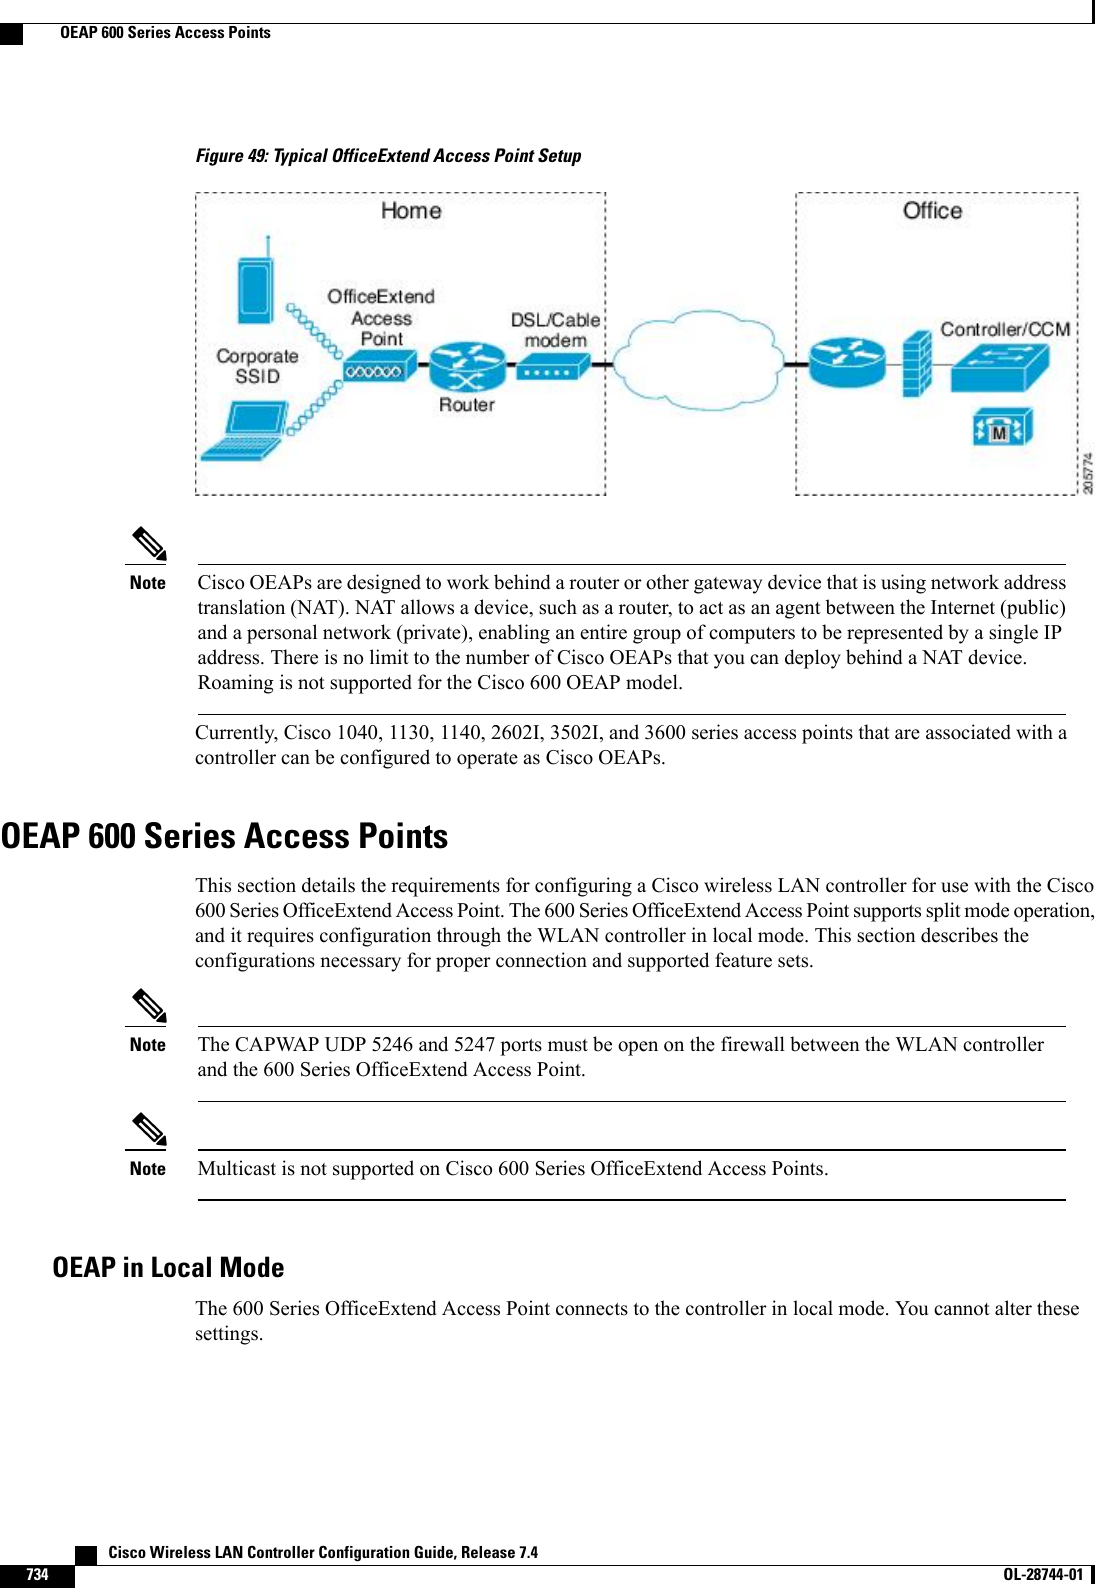 Figure 49: Typical OfficeExtend Access Point SetupCisco OEAPs are designed to work behind a router or other gateway device that is using network addresstranslation (NAT). NAT allows a device, such as a router, to act as an agent between the Internet (public)and a personal network (private), enabling an entire group of computers to be represented by a single IPaddress. There is no limit to the number of Cisco OEAPs that you can deploy behind a NAT device.Roaming is not supported for the Cisco 600 OEAP model.NoteCurrently, Cisco 1040, 1130, 1140, 2602I, 3502I, and 3600 series access points that are associated with acontroller can be configured to operate as Cisco OEAPs.OEAP 600 Series Access PointsThis section details the requirements for configuring a Cisco wireless LAN controller for use with the Cisco600 Series OfficeExtend Access Point. The 600 Series OfficeExtend Access Point supports split mode operation,and it requires configuration through the WLAN controller in local mode. This section describes theconfigurations necessary for proper connection and supported feature sets.The CAPWAP UDP 5246 and 5247 ports must be open on the firewall between the WLAN controllerand the 600 Series OfficeExtend Access Point.NoteMulticast is not supported on Cisco 600 Series OfficeExtend Access Points.NoteOEAP in Local ModeThe 600 Series OfficeExtend Access Point connects to the controller in local mode. You cannot alter thesesettings.   Cisco Wireless LAN Controller Configuration Guide, Release 7.4734 OL-28744-01  OEAP 600 Series Access Points